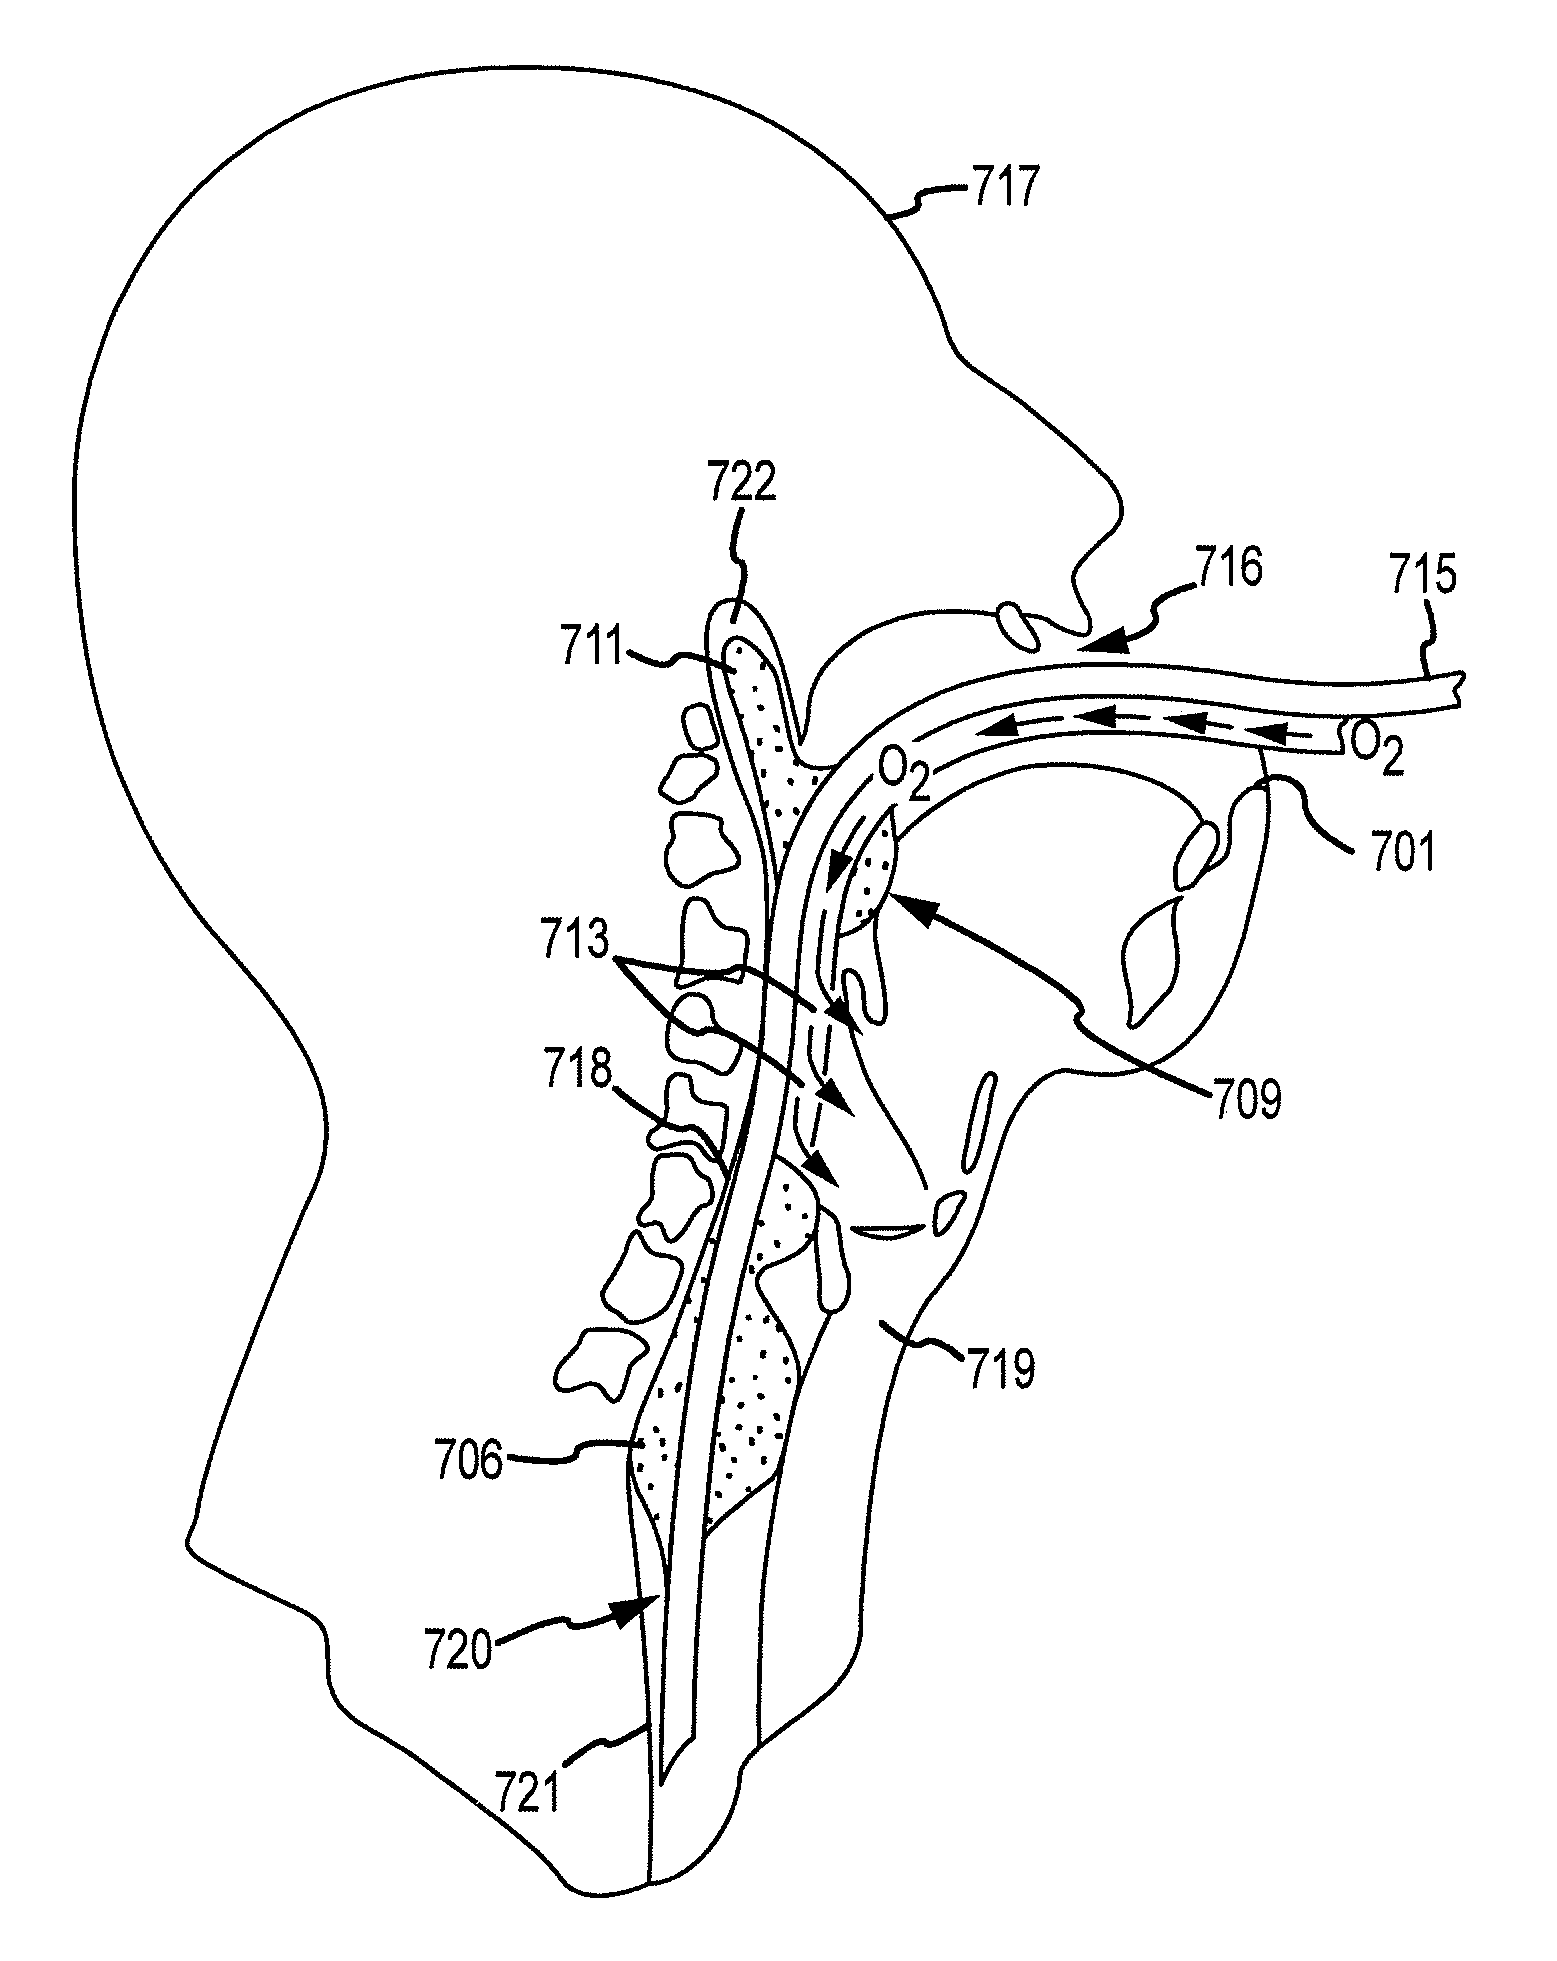 System, method, and device to increase circulation during cpr without requiring positive pressure ventilation